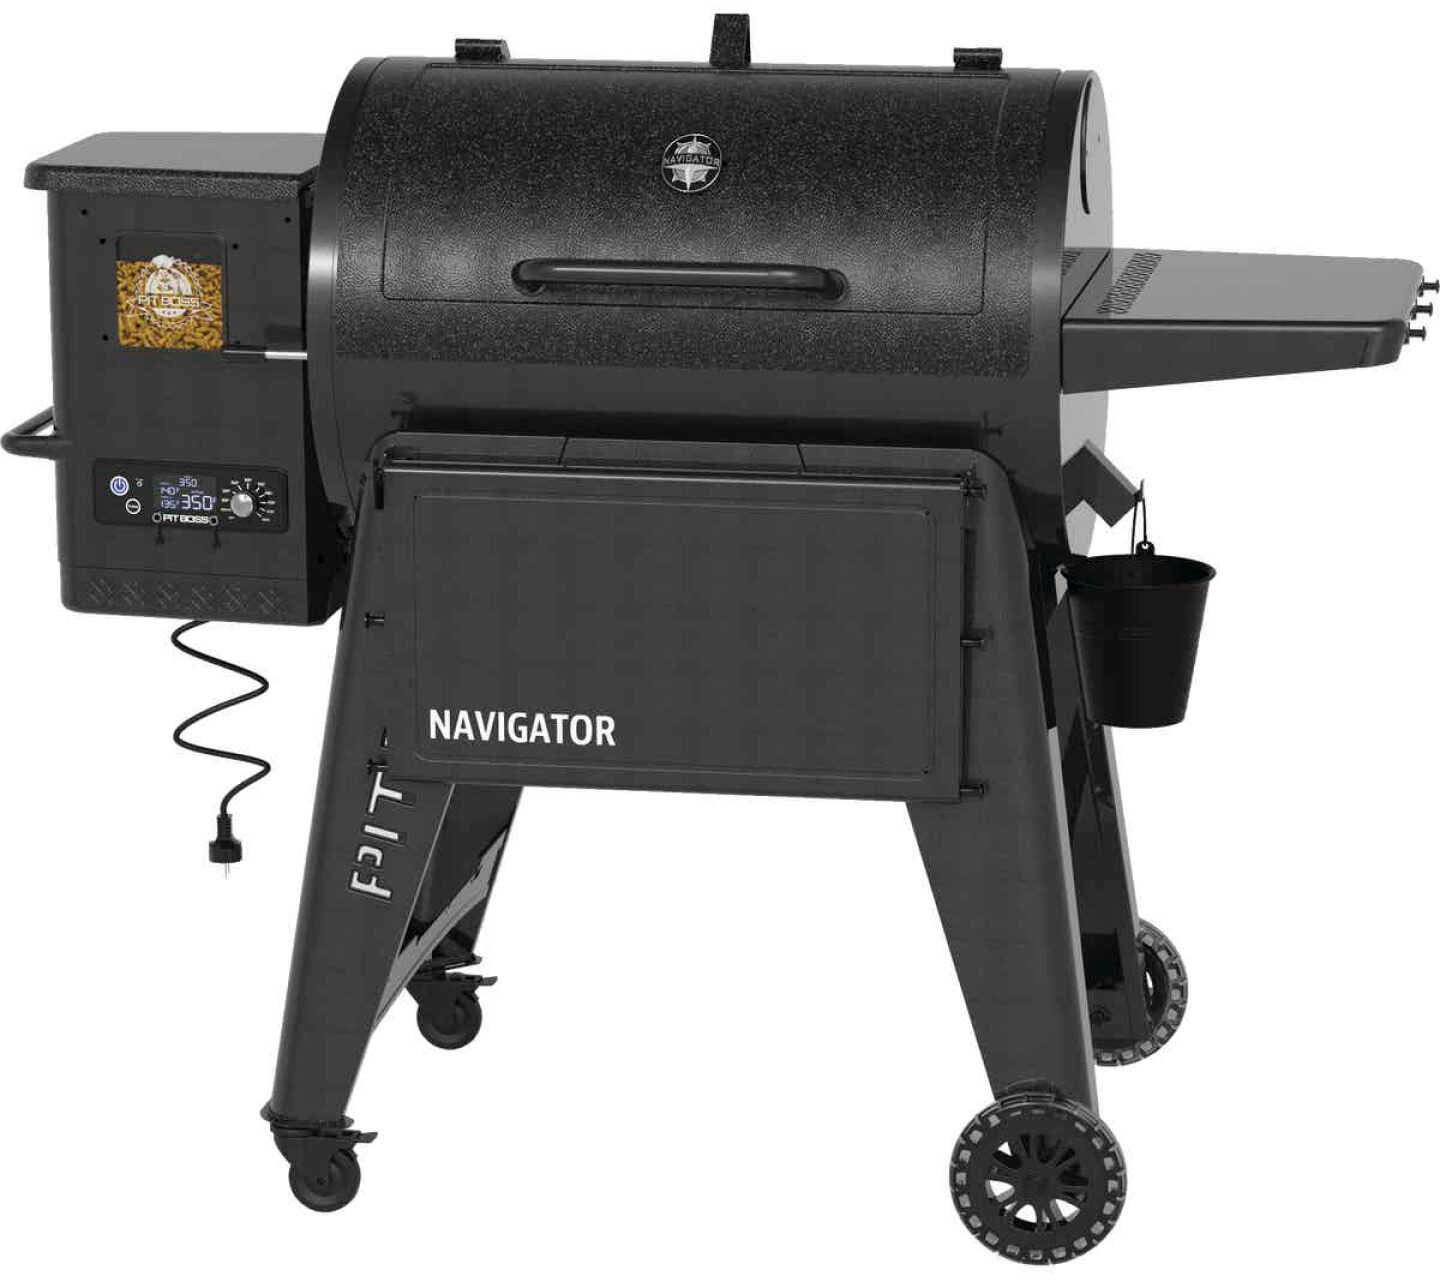 Pit Boss Navigator Wood Pellet Grill with Grill Cover Black PB850G